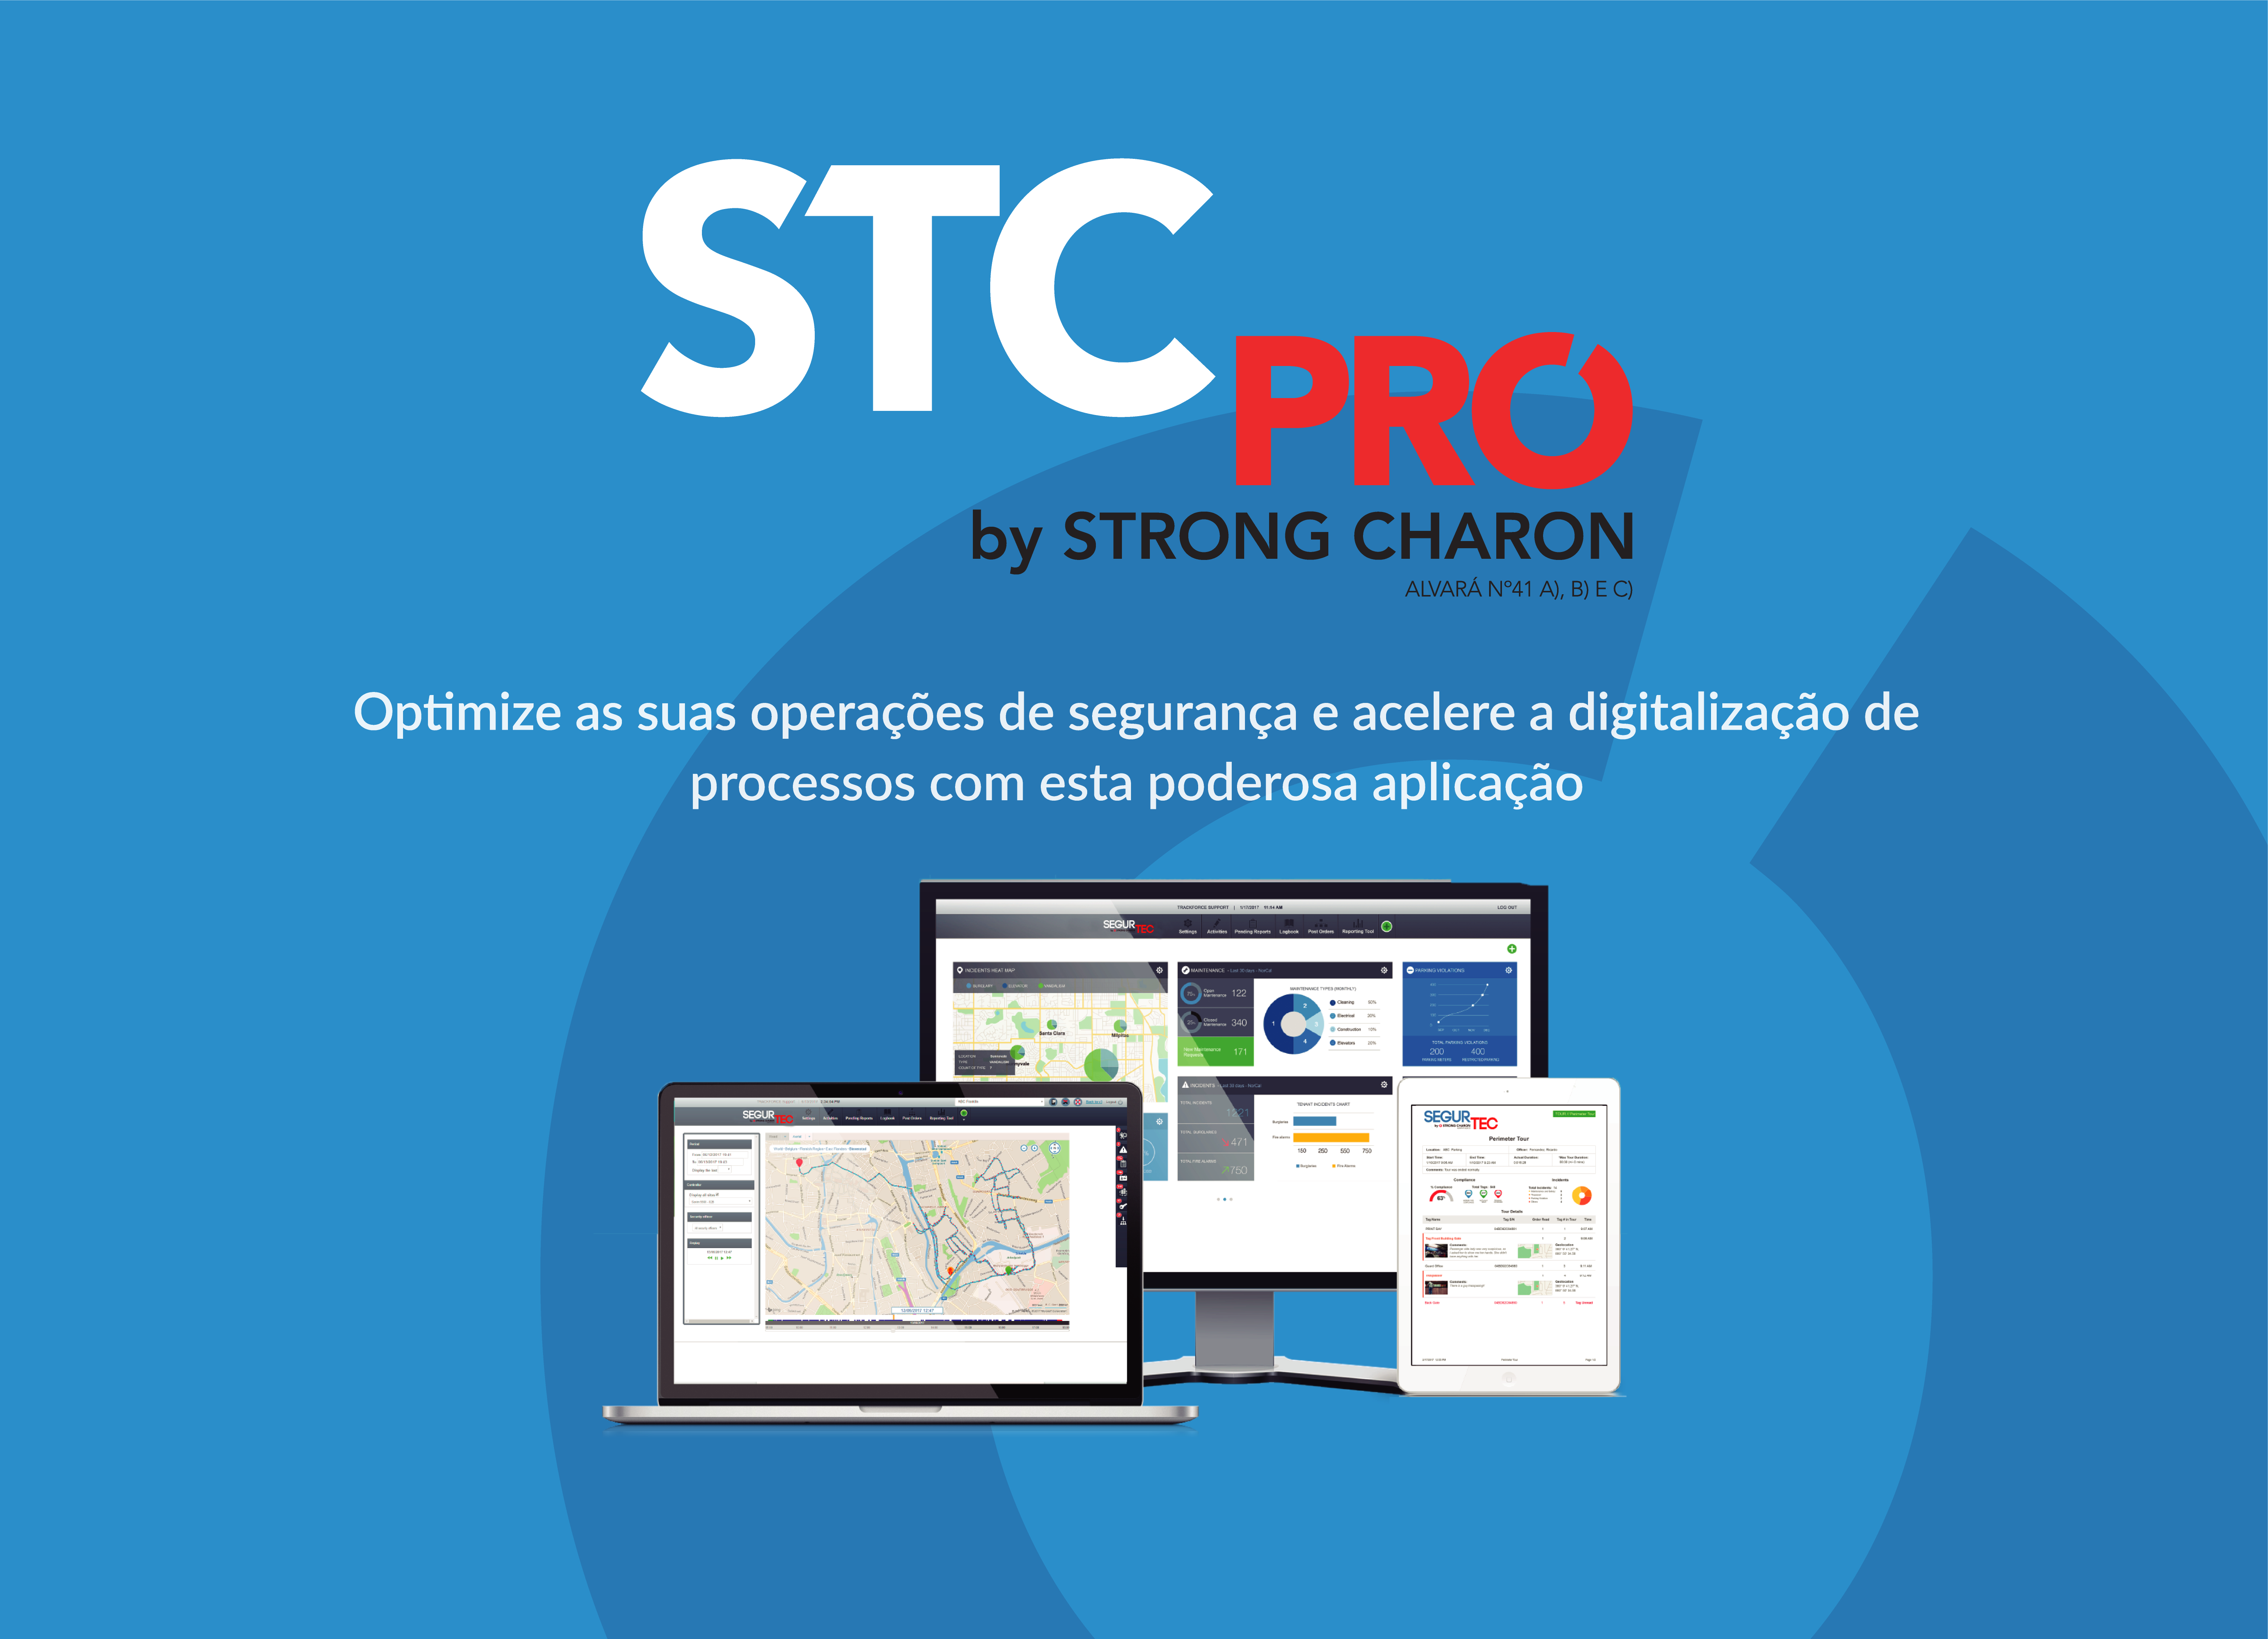 STCpro by Strong Charon – The Web Platform for Security Operation